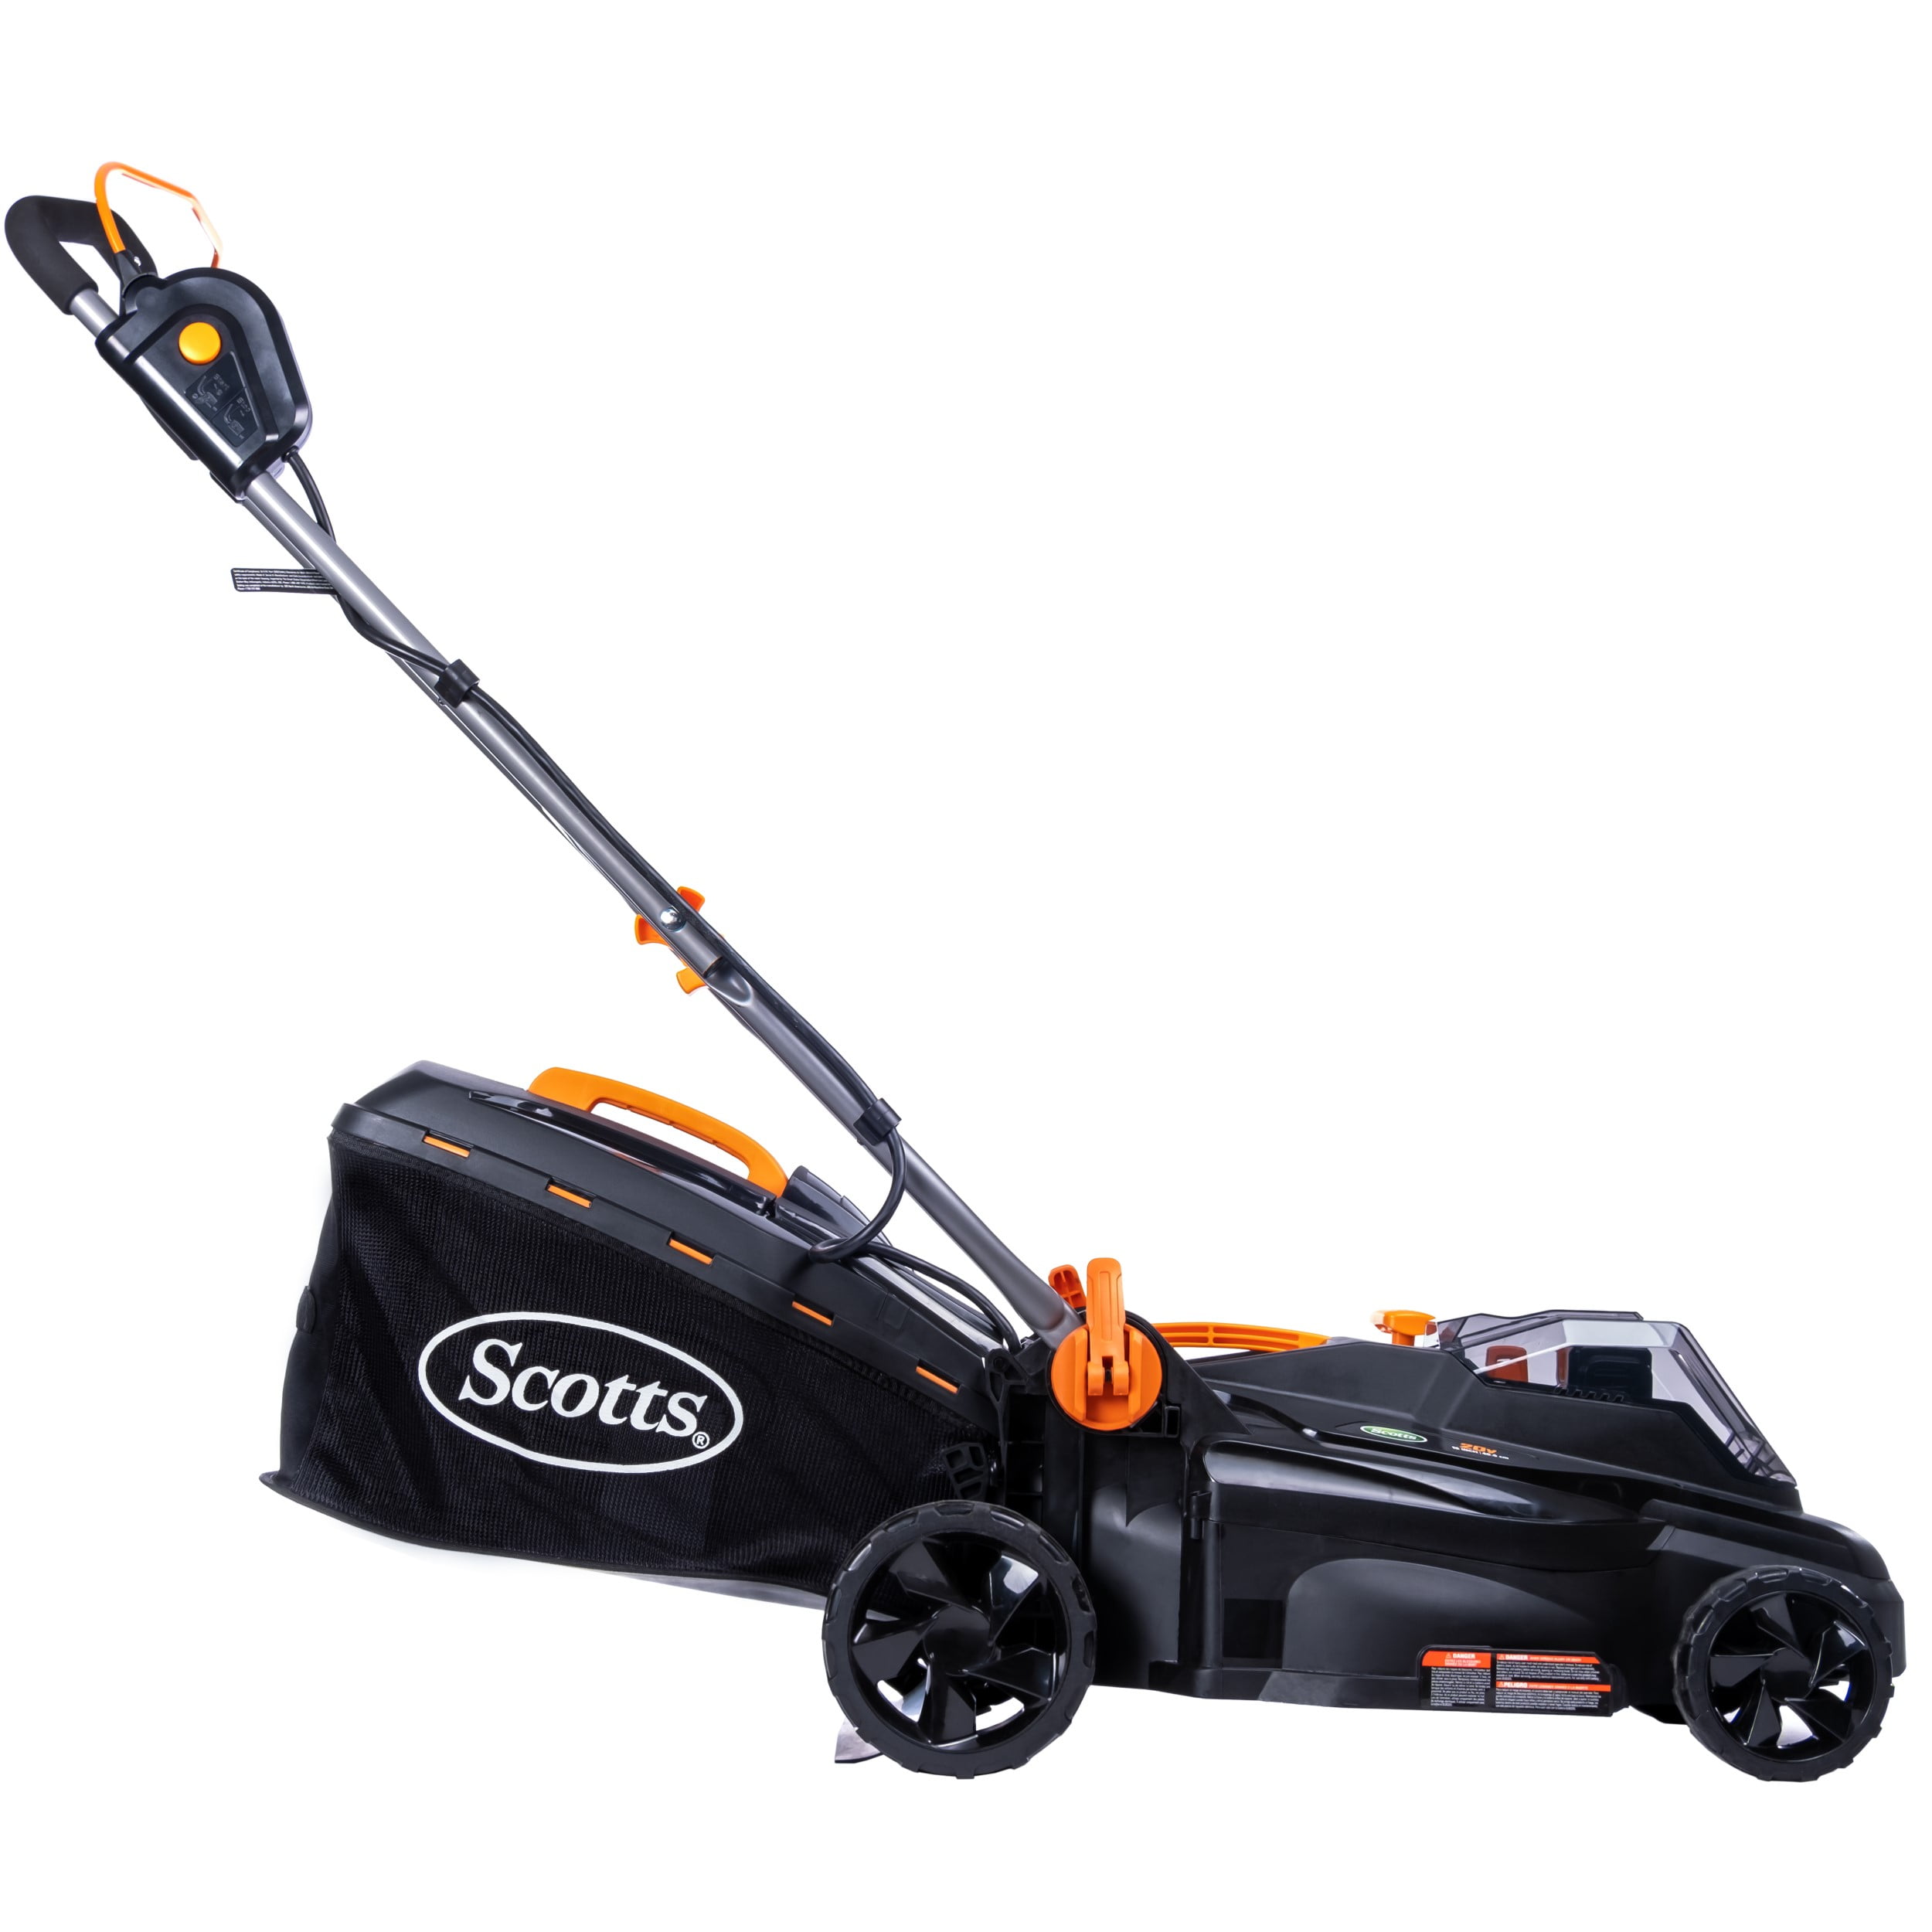 Scotts 62016S 20-Volt 16-Inch Cordless Electric Mower, 4.0Ah Battery & Fast Charger Included - 2